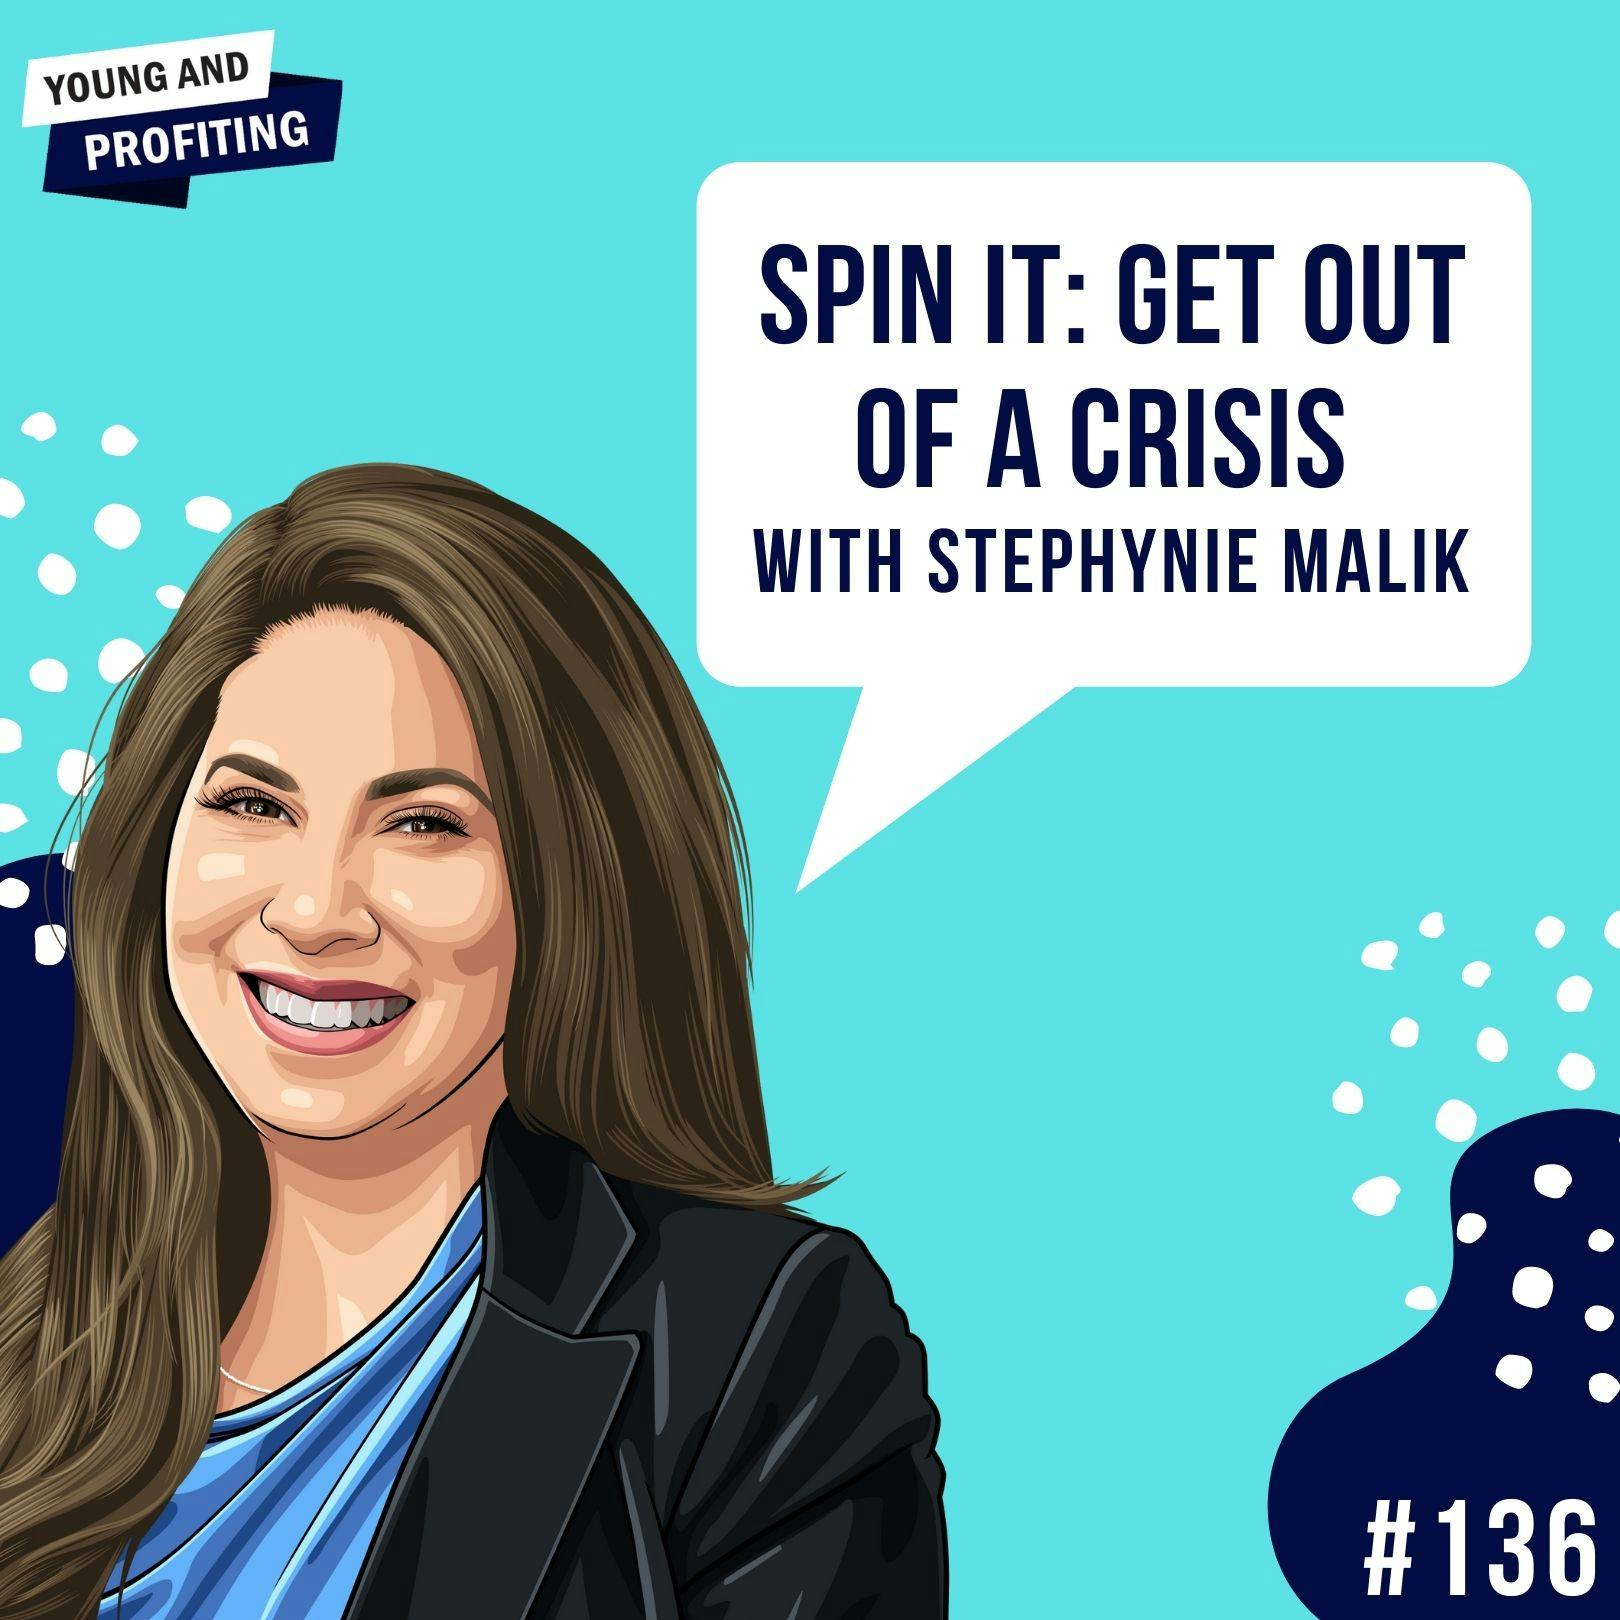 Stephynie Malik: Spin It - Get Out of a Crisis | E136 by Hala Taha | YAP Media Network